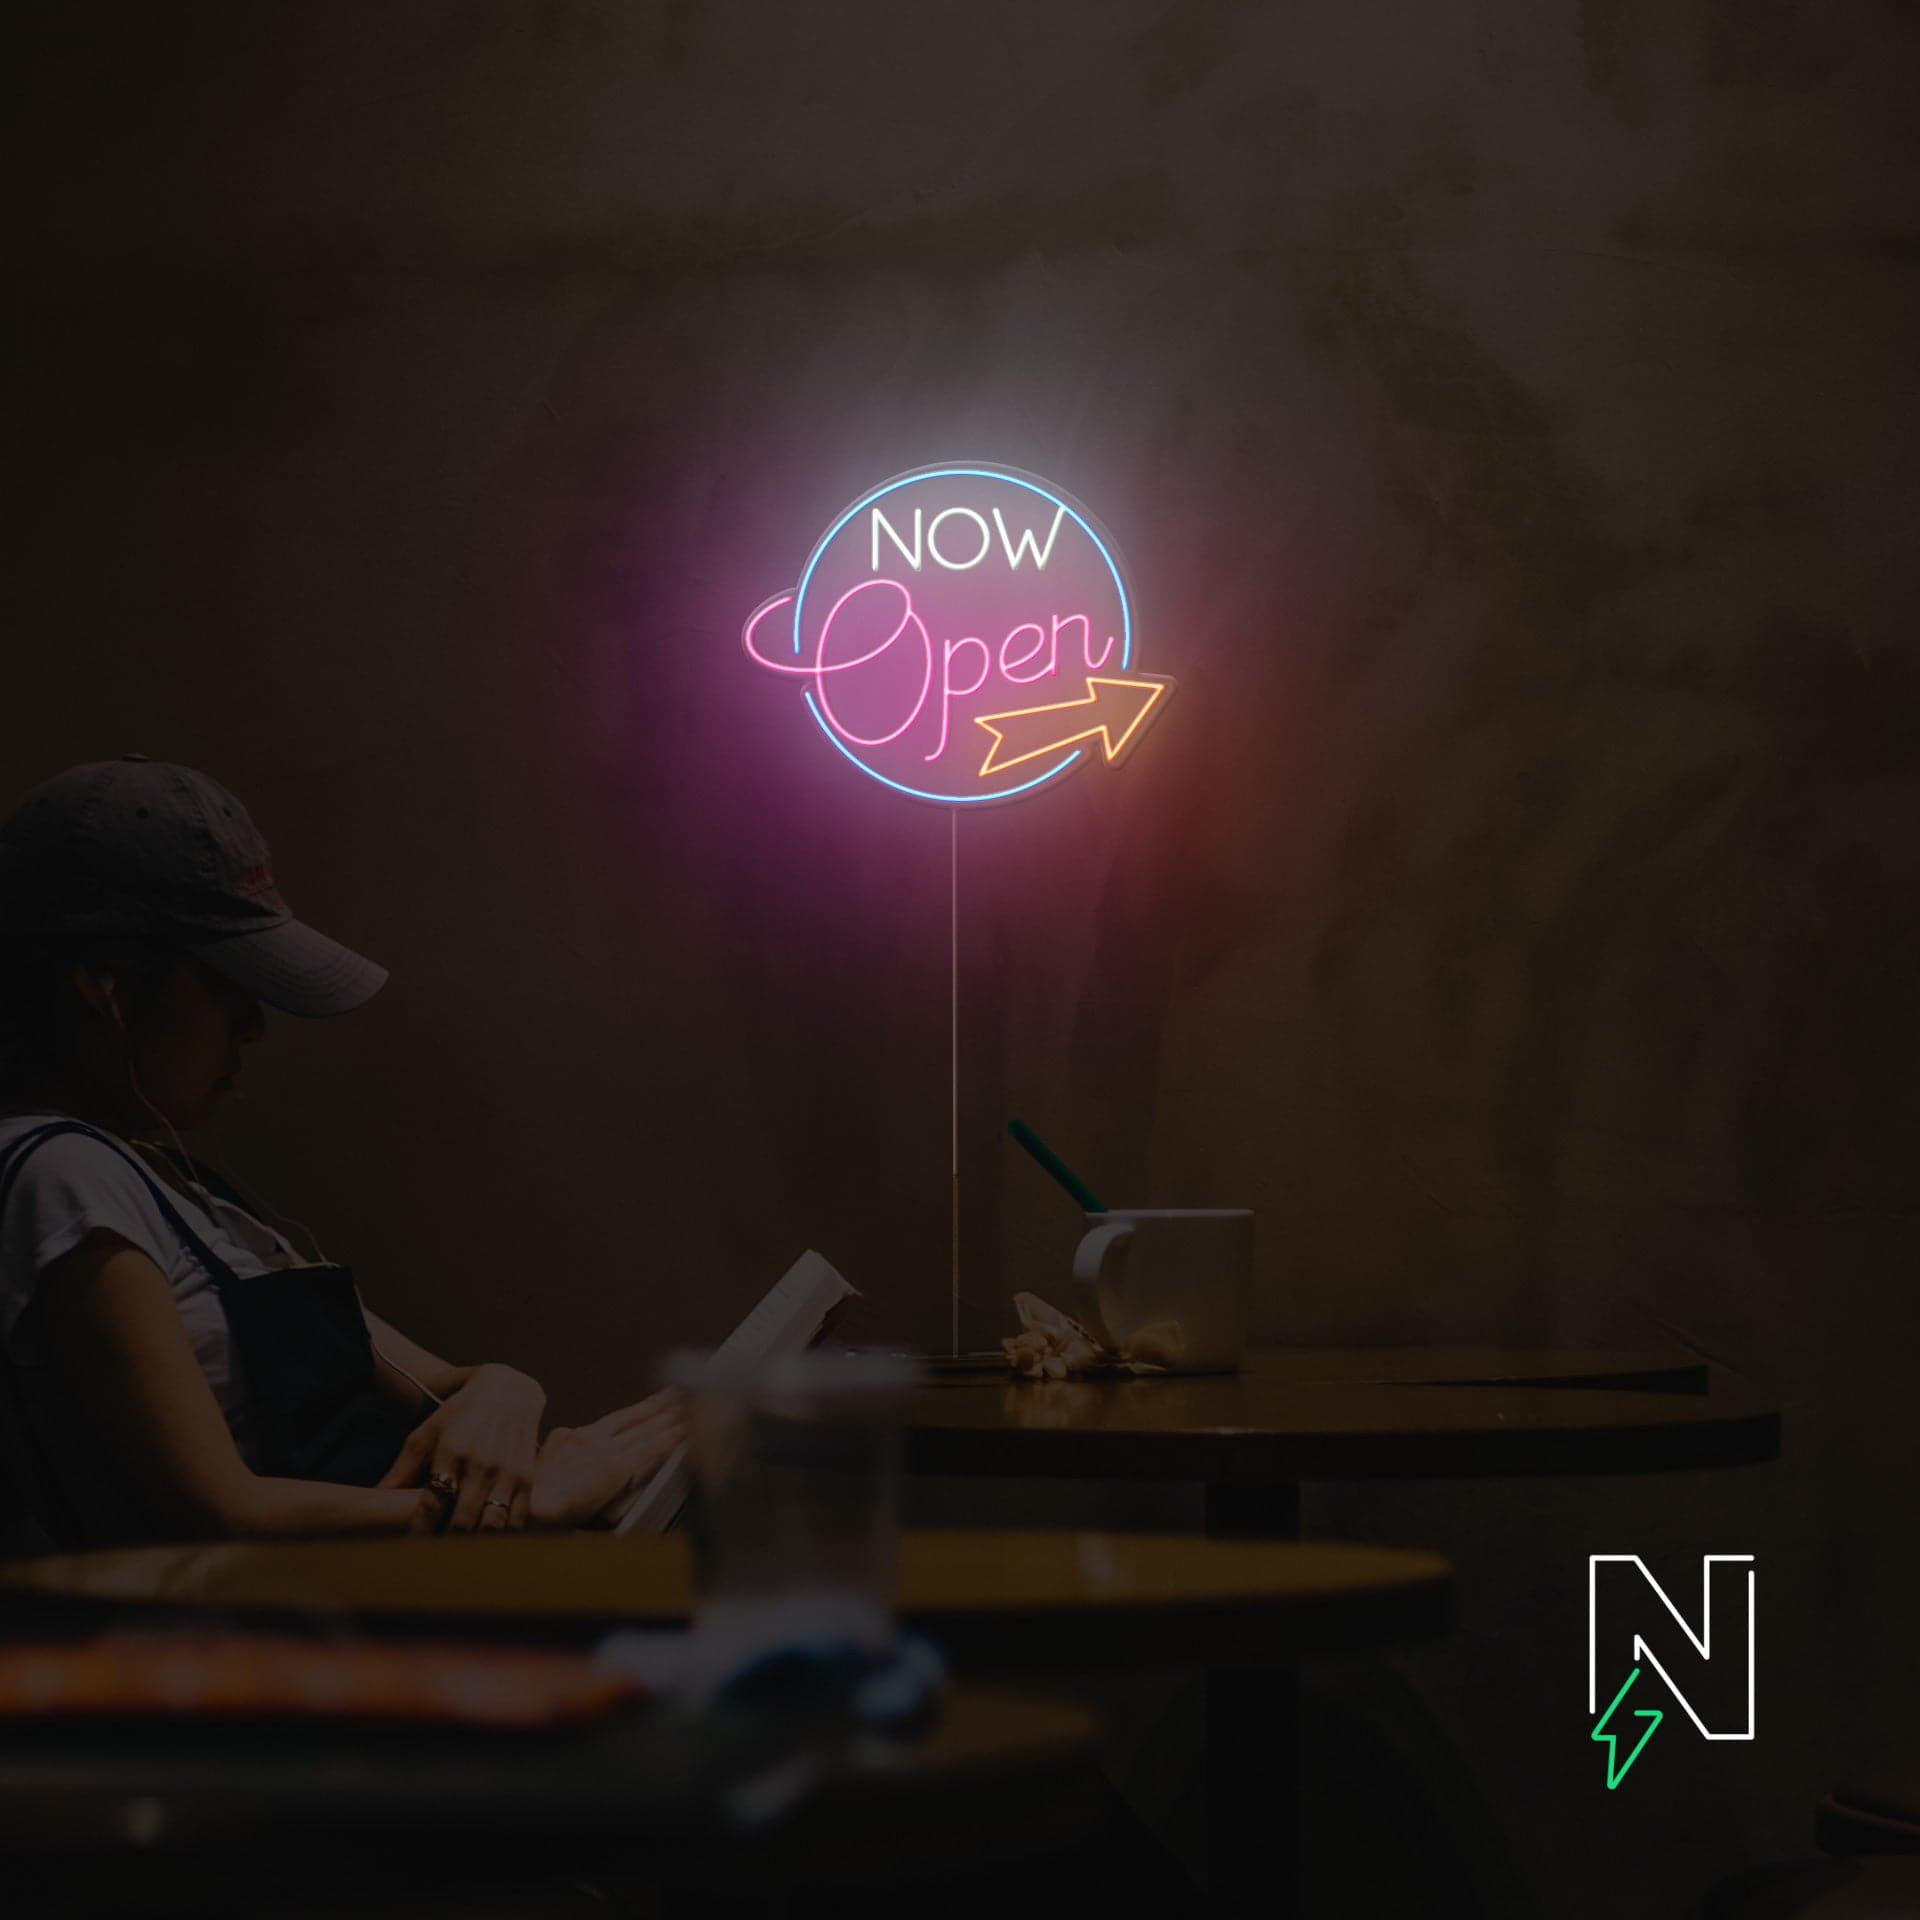 Customizable Café Neon Signs To Make Your Days Brighter Neon Attack 